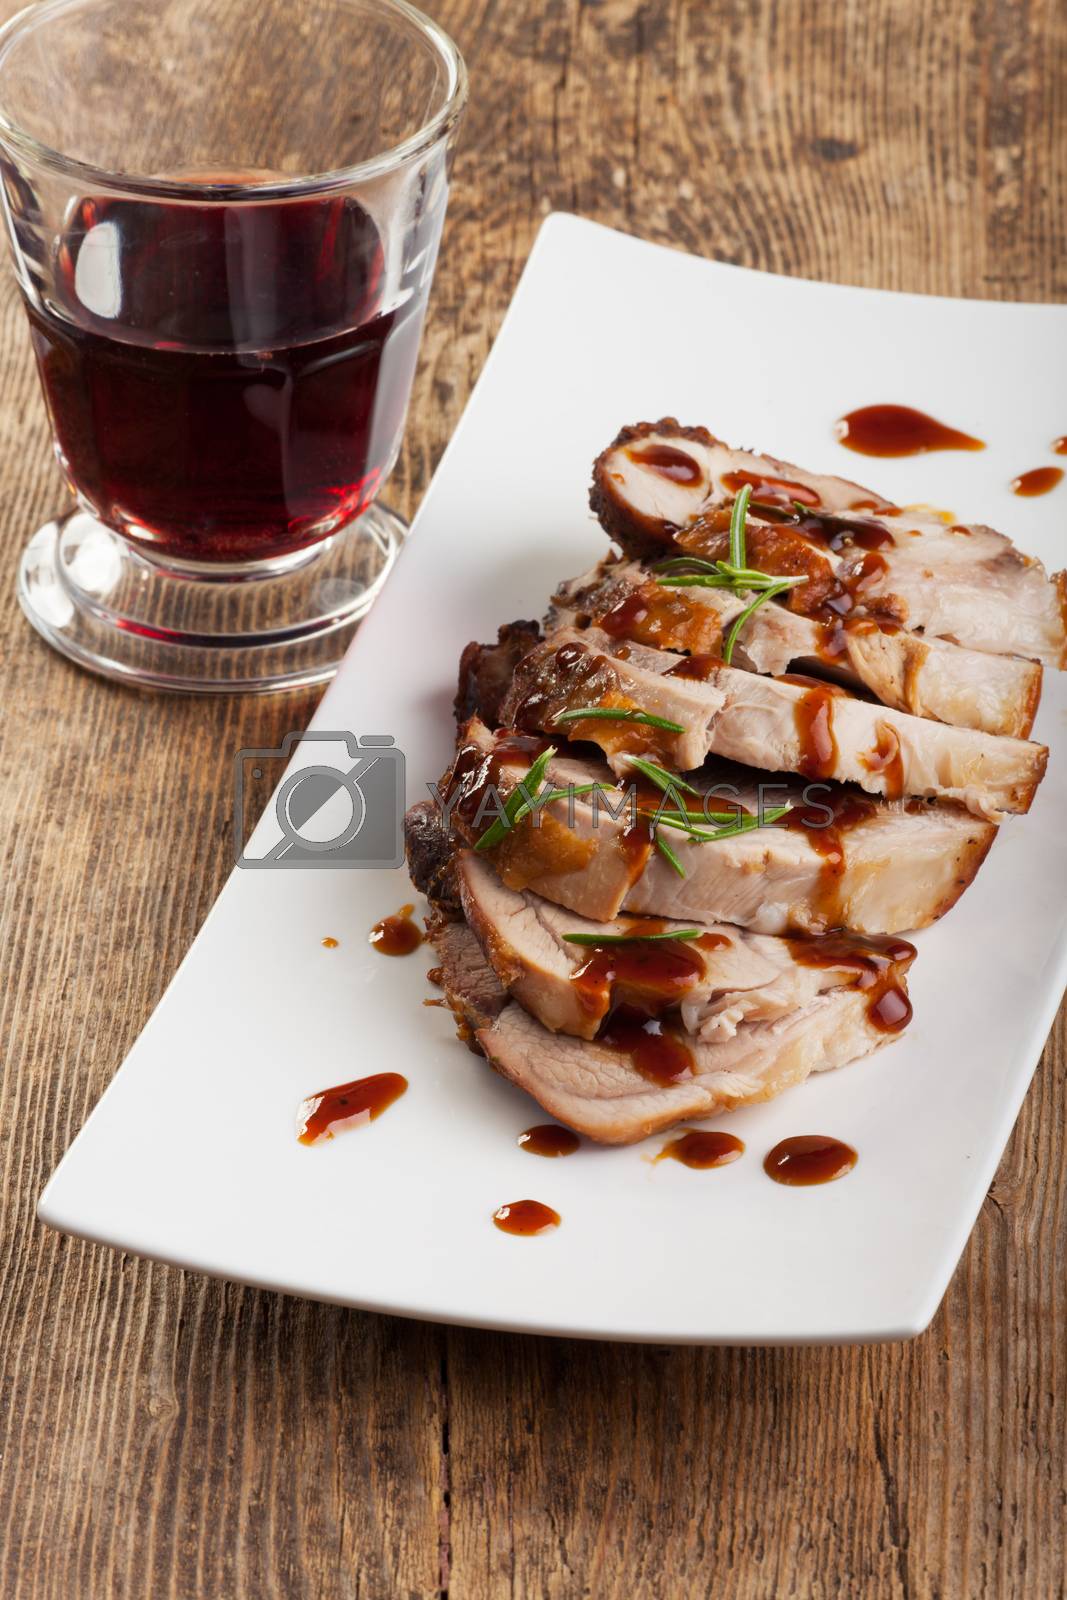 Royalty free image of roasted pork dish  by bernjuer